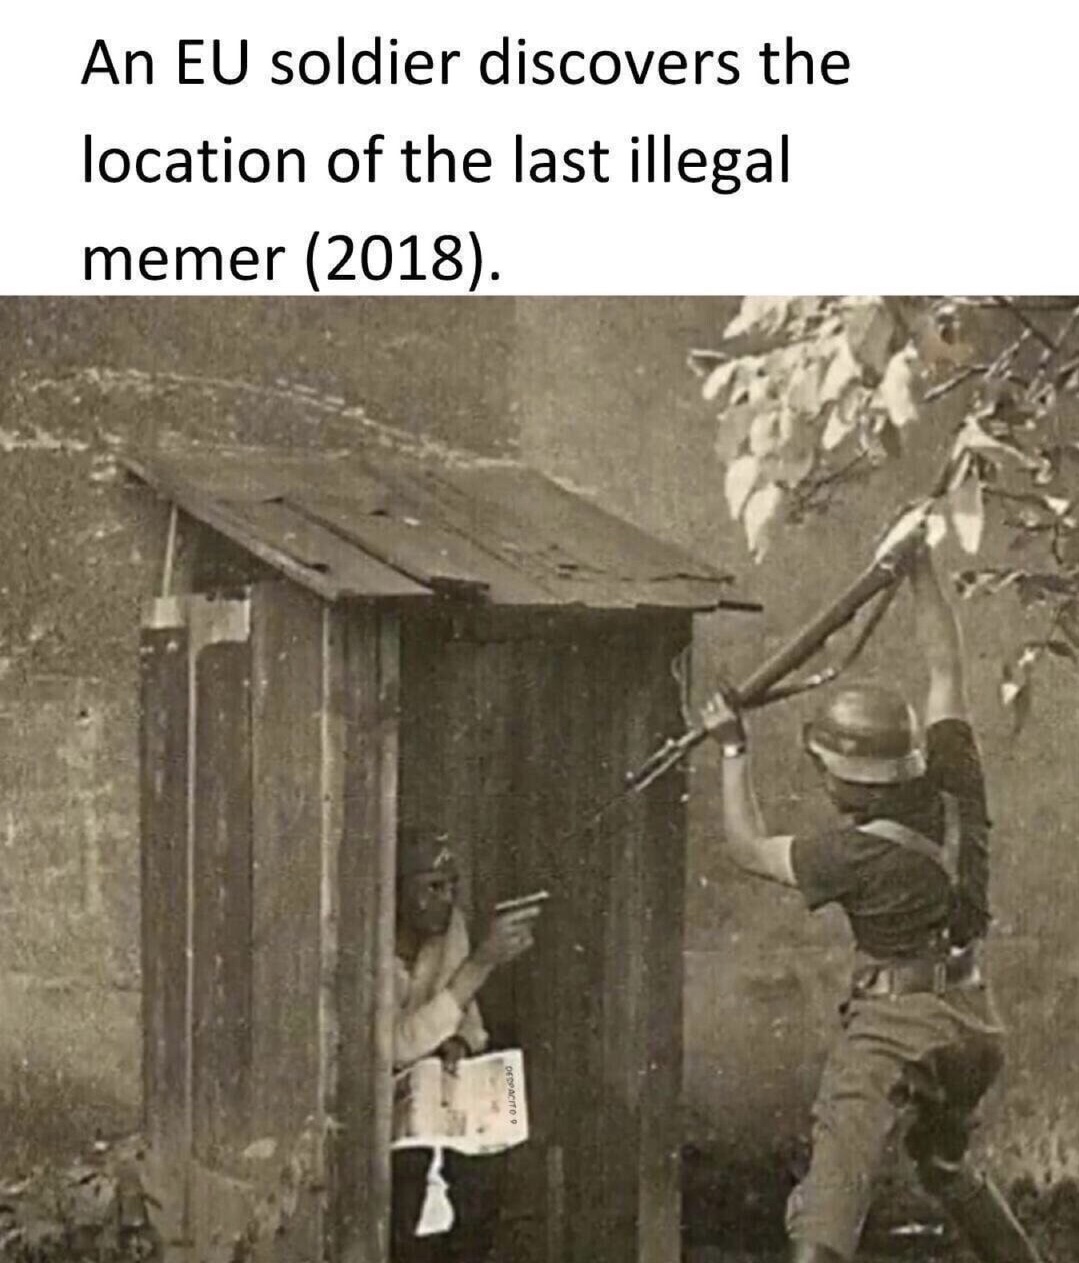 eu illegal memes - An Eu soldier discovers the location of the last illegal memer 2018. Despacito